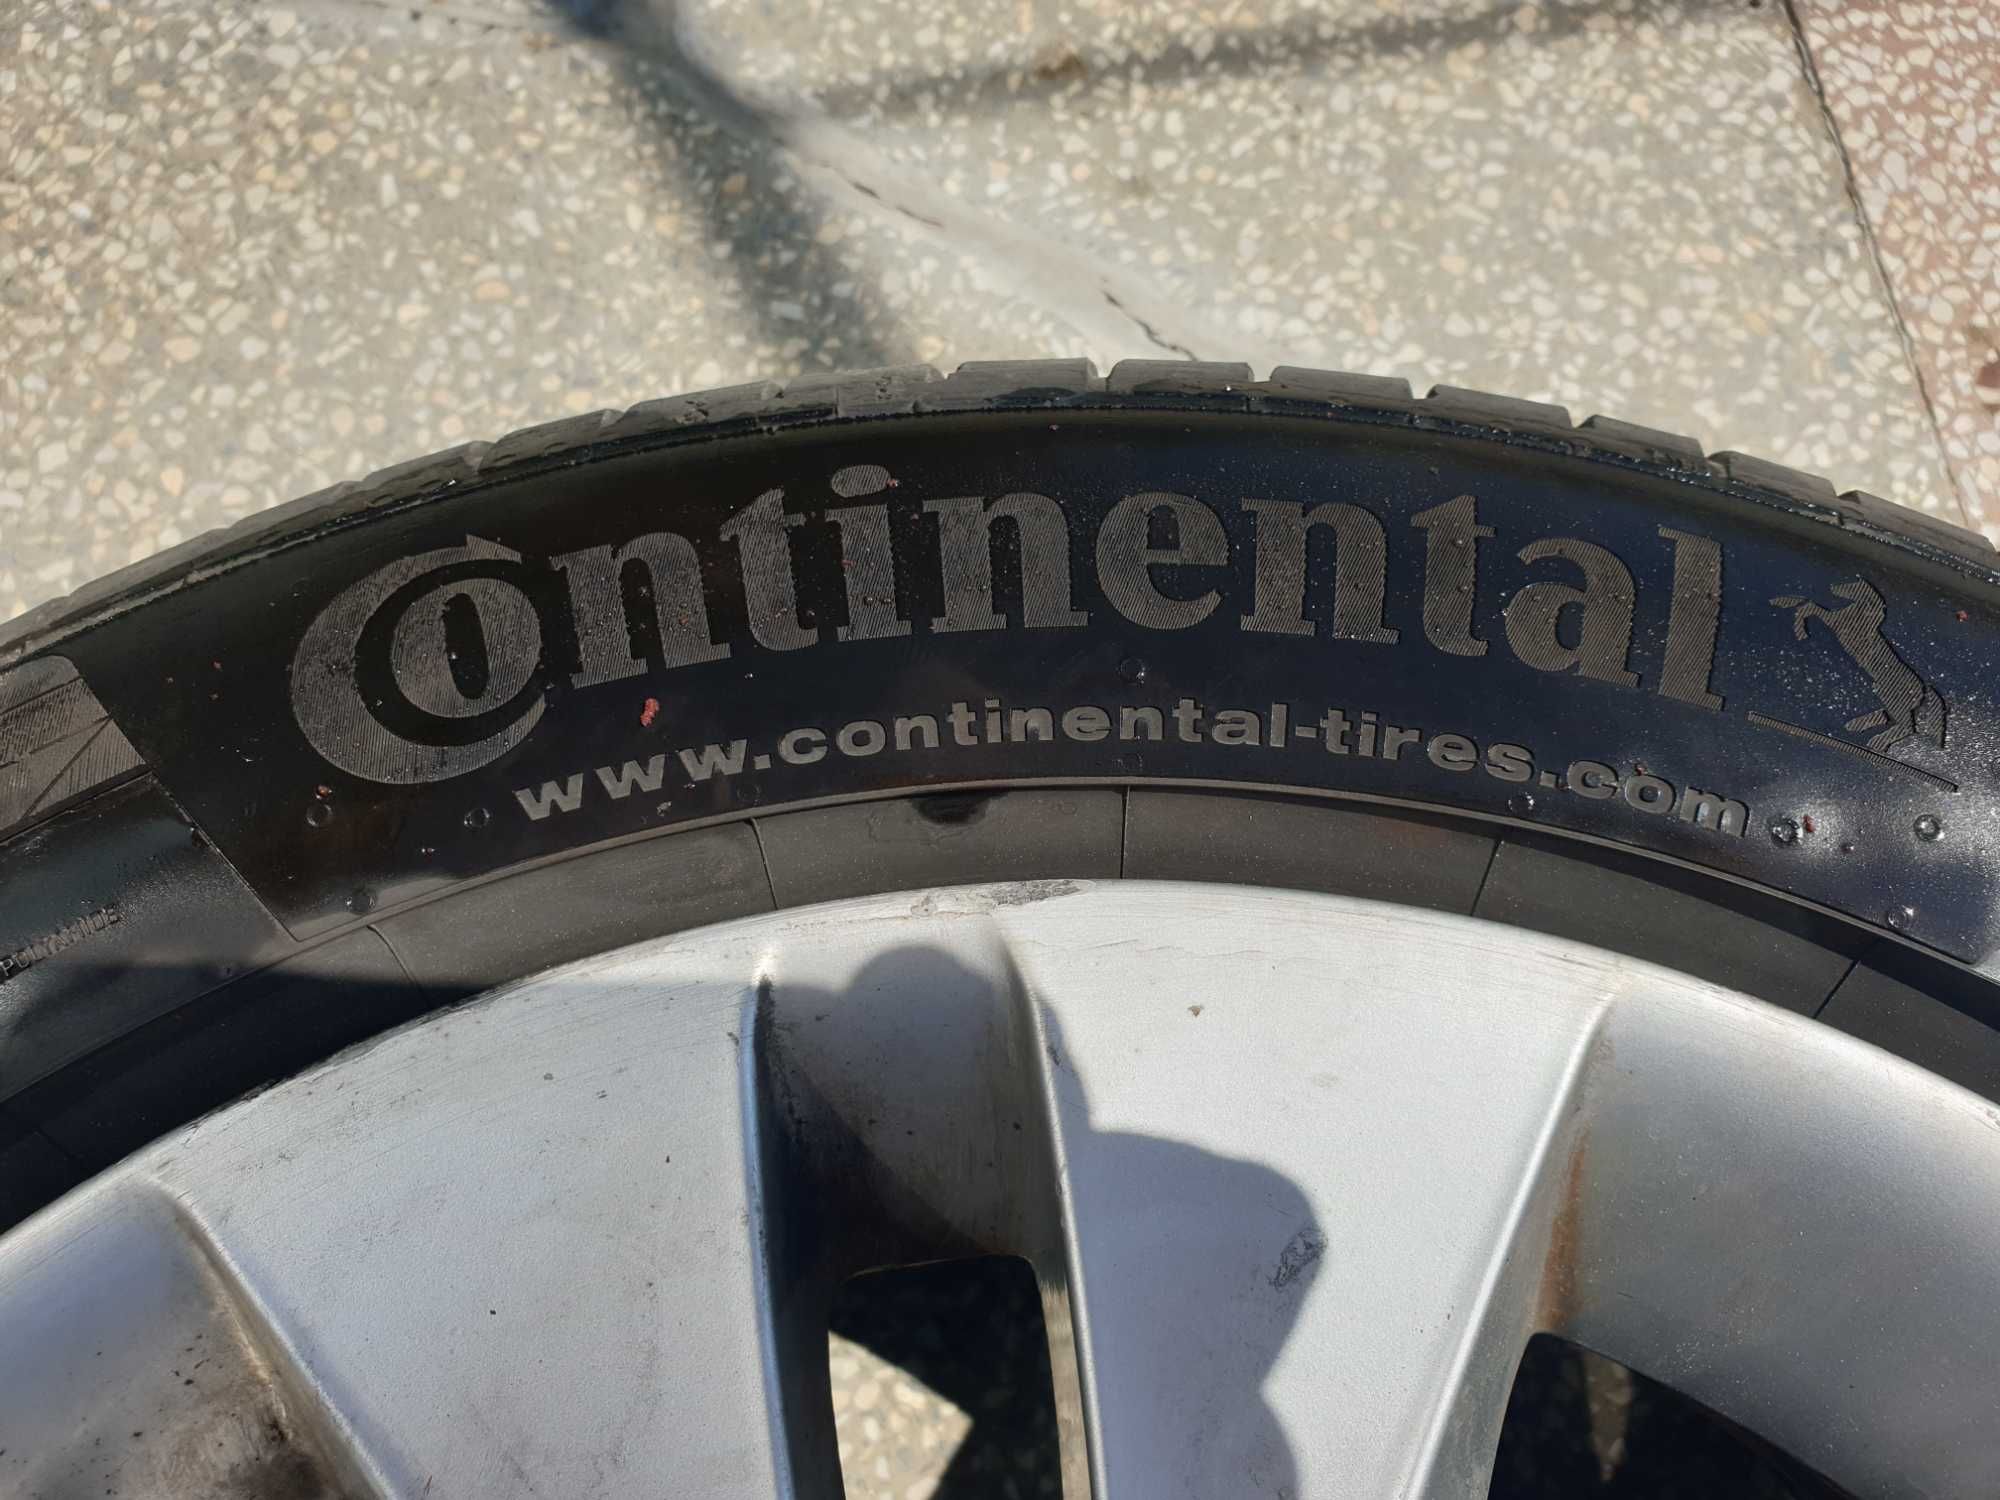 2 броя летни CONTINENTAL Conti Sport Contact 5  225/50 R17 94W RFT.